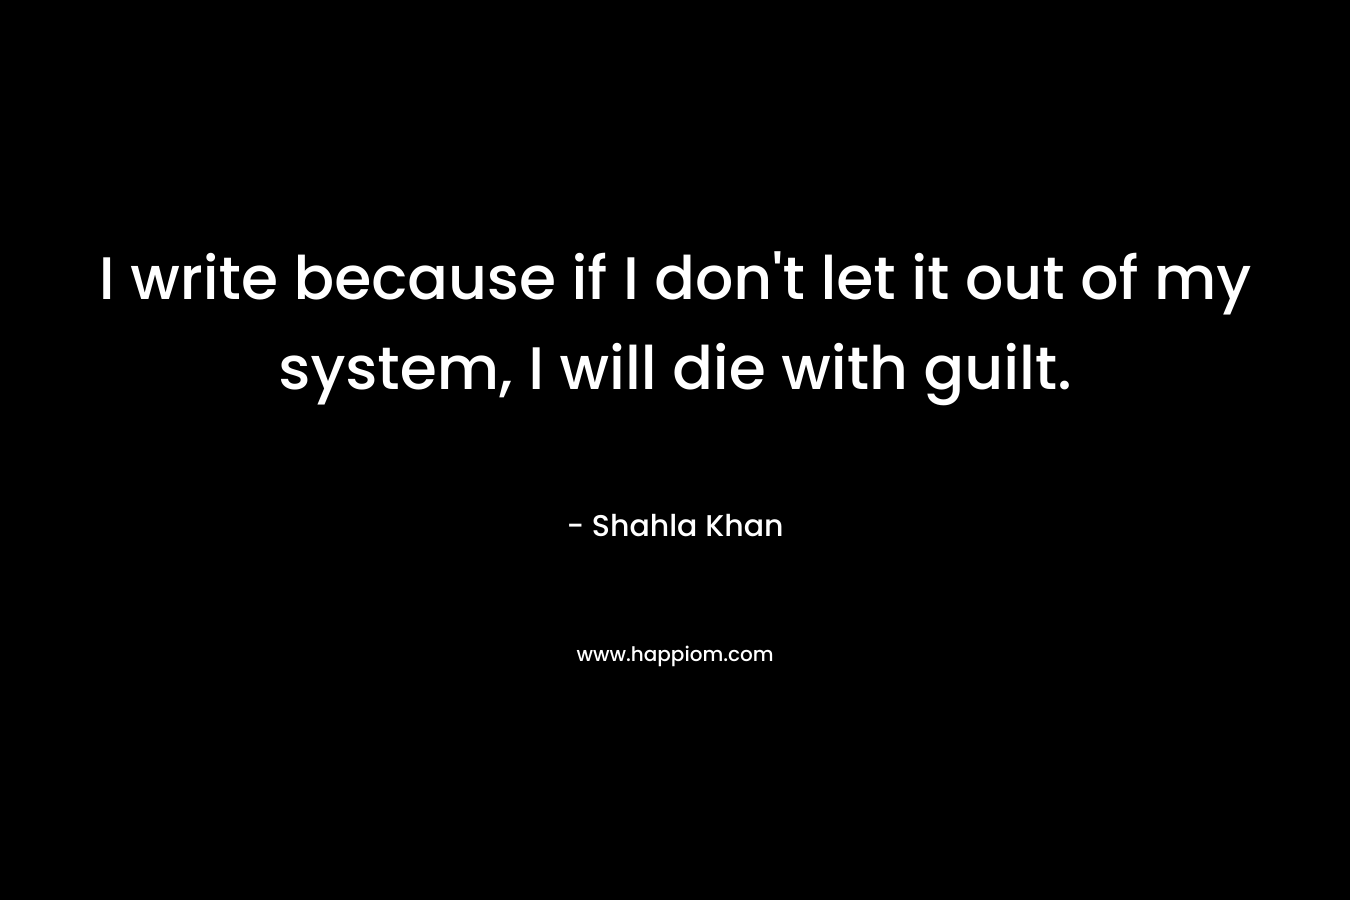 I write because if I don't let it out of my system, I will die with guilt.